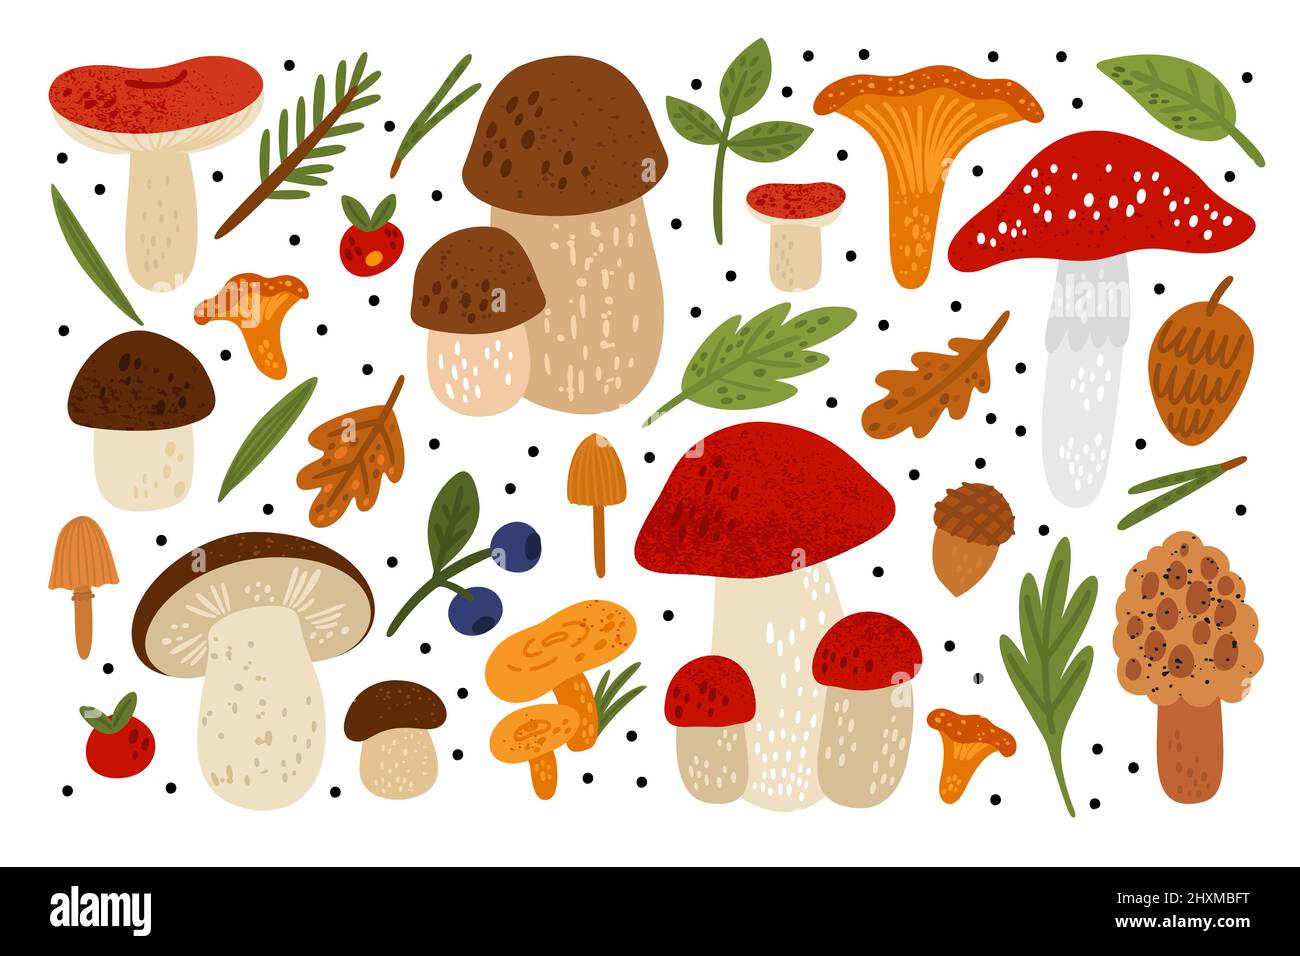 Forest mushrooms. Woodland fungus with leaves. Berries and coniferous needles. Edible and poisonous. Hand drawn textures. Agaric or chanterelle. Oak Stock Vector